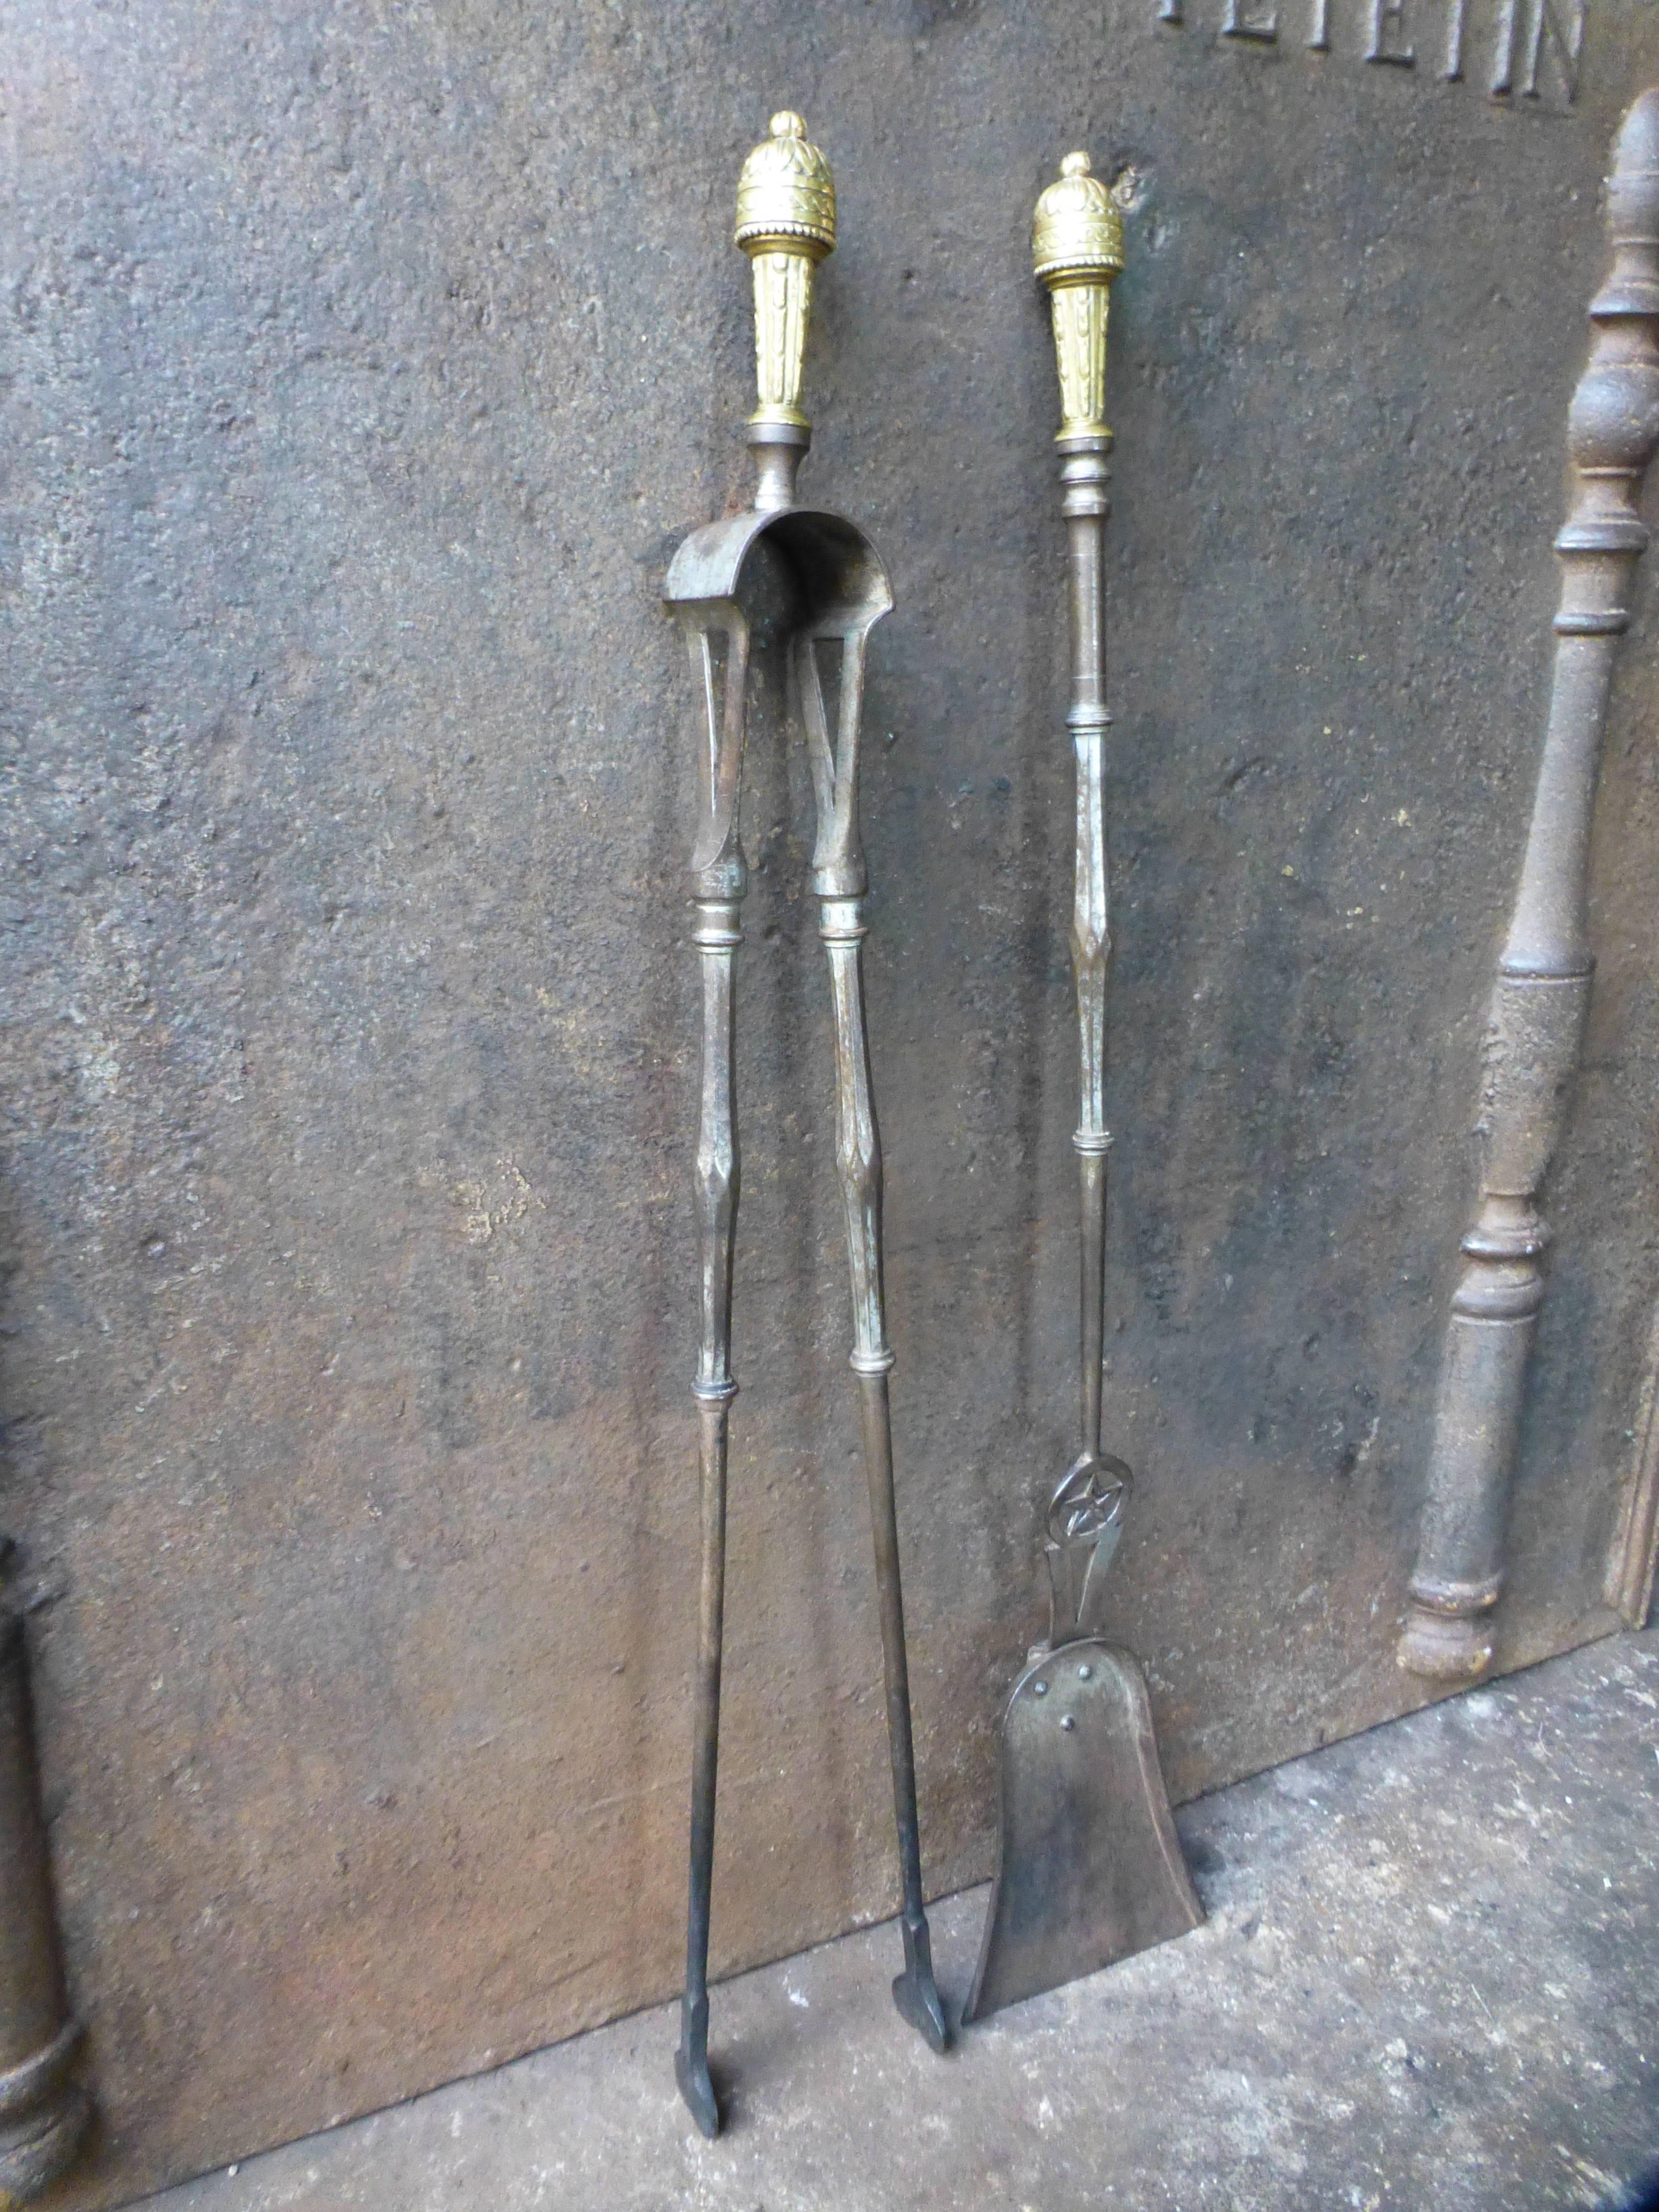 Rare set of French fire tools or fire irons.

We have a unique and specialized collection of antique and used fireplace accessories consisting of more than 1000 listings at 1stdibs. Amongst others we always have 300+ firebacks, 250+ pairs of